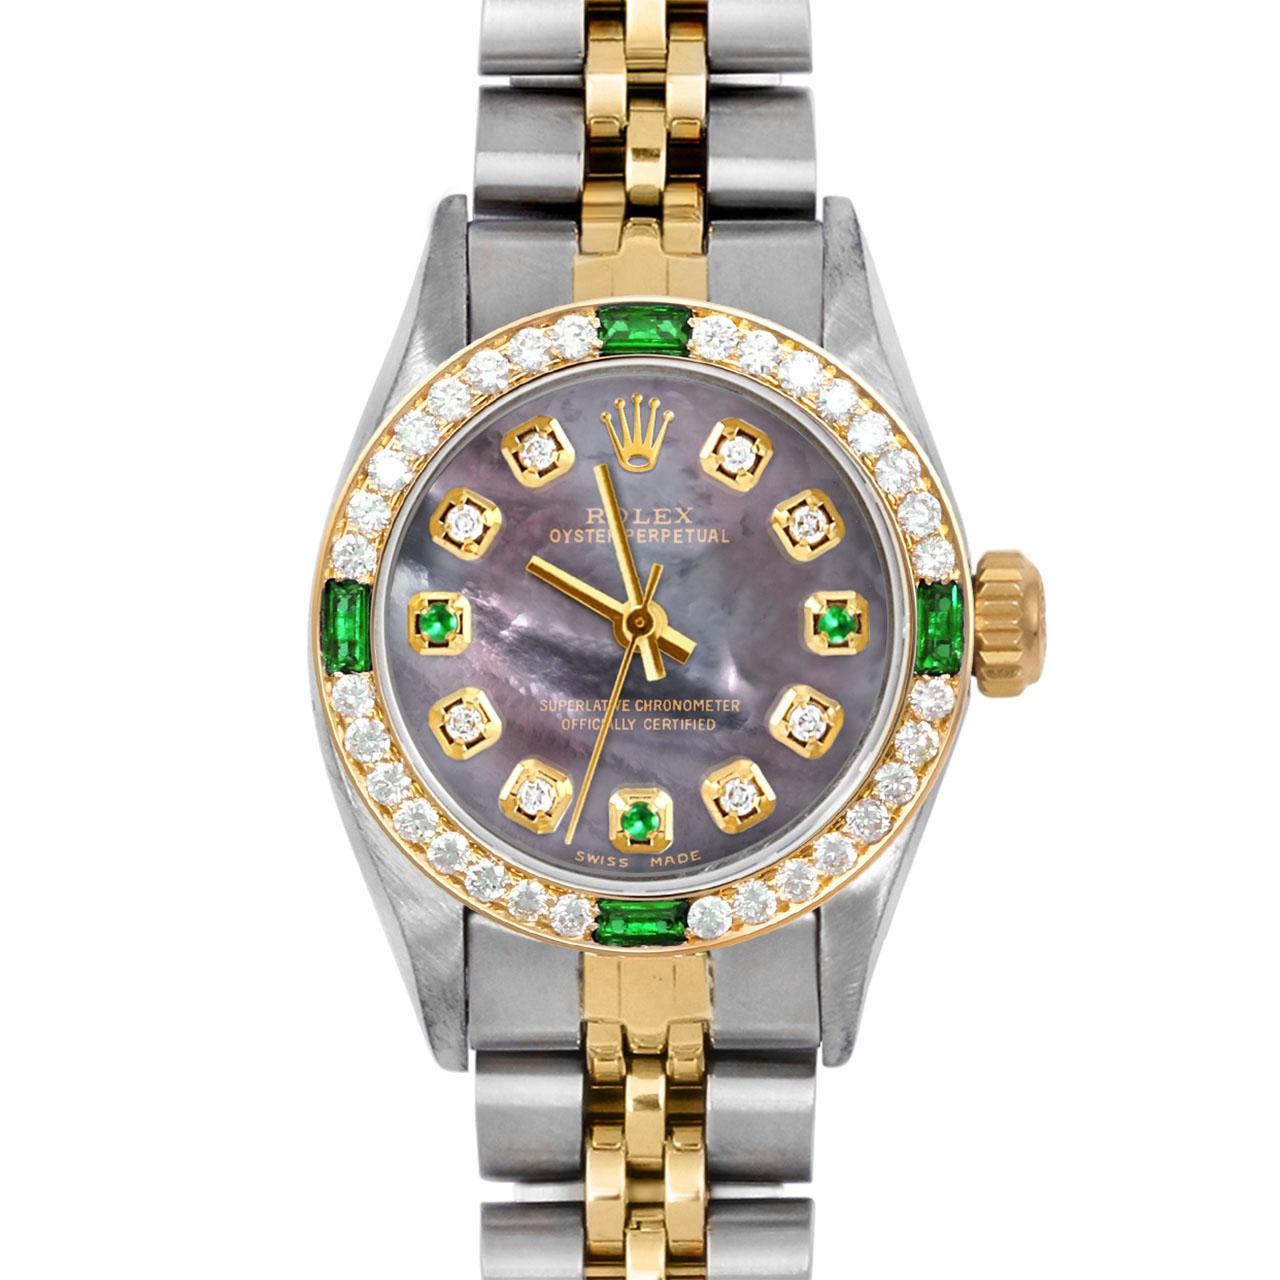 Brand : Rolex
Model : Oyster Perpetual 
Gender : Ladies
Metals : 14K Yellow Gold / Stainless Steel
Case Size : 24 mm

Dial : Custom Tahitian Mother Of Pearl Emerald Diamond Dial (This dial is not original Rolex And has been added aftermarket yet is